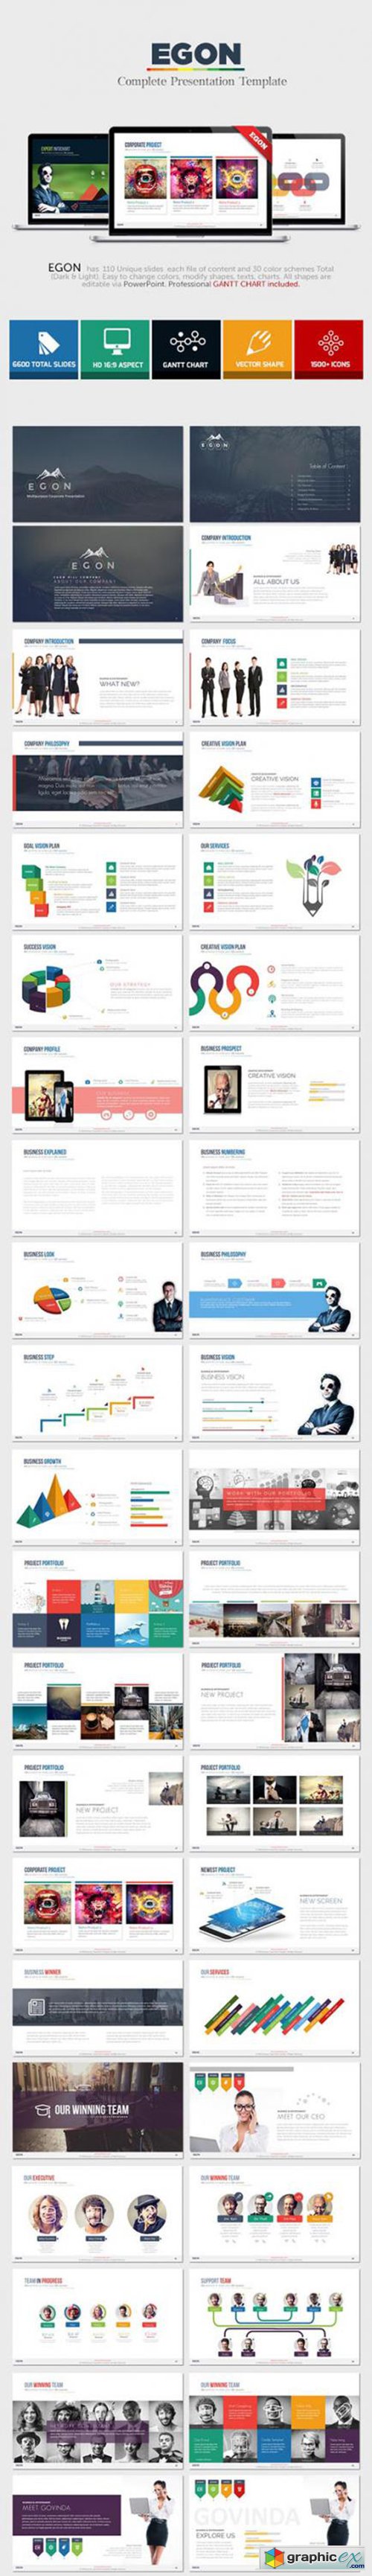 Egon - Complete Powerpoint Template